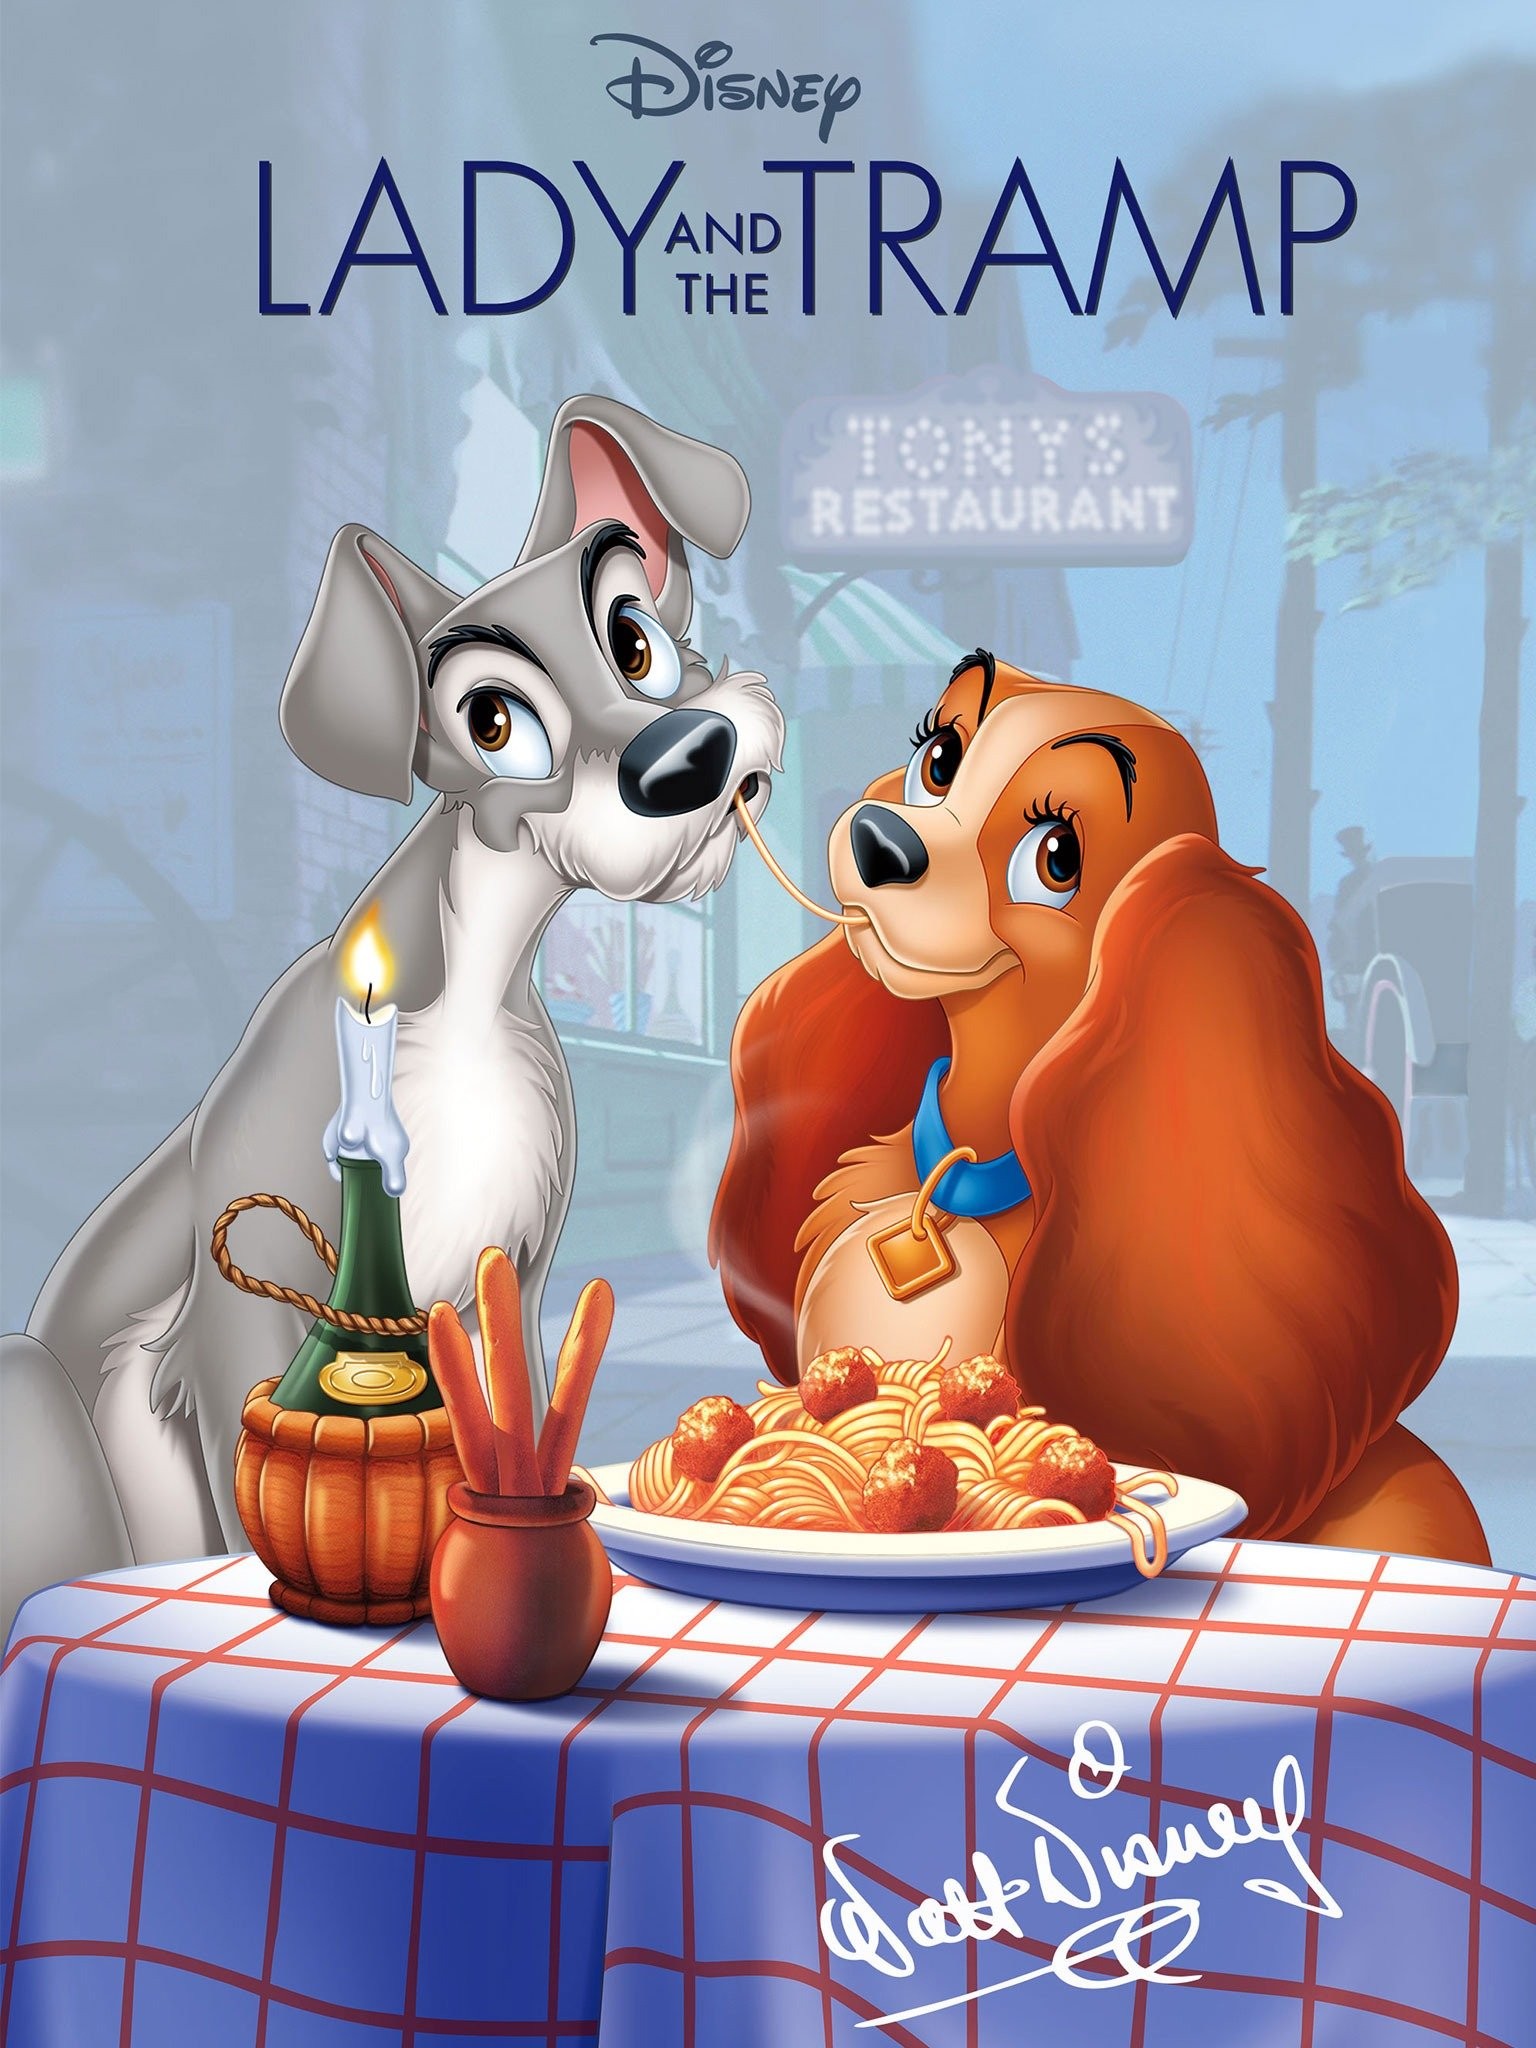 Lady and the Tramp' Screening - Media Play News